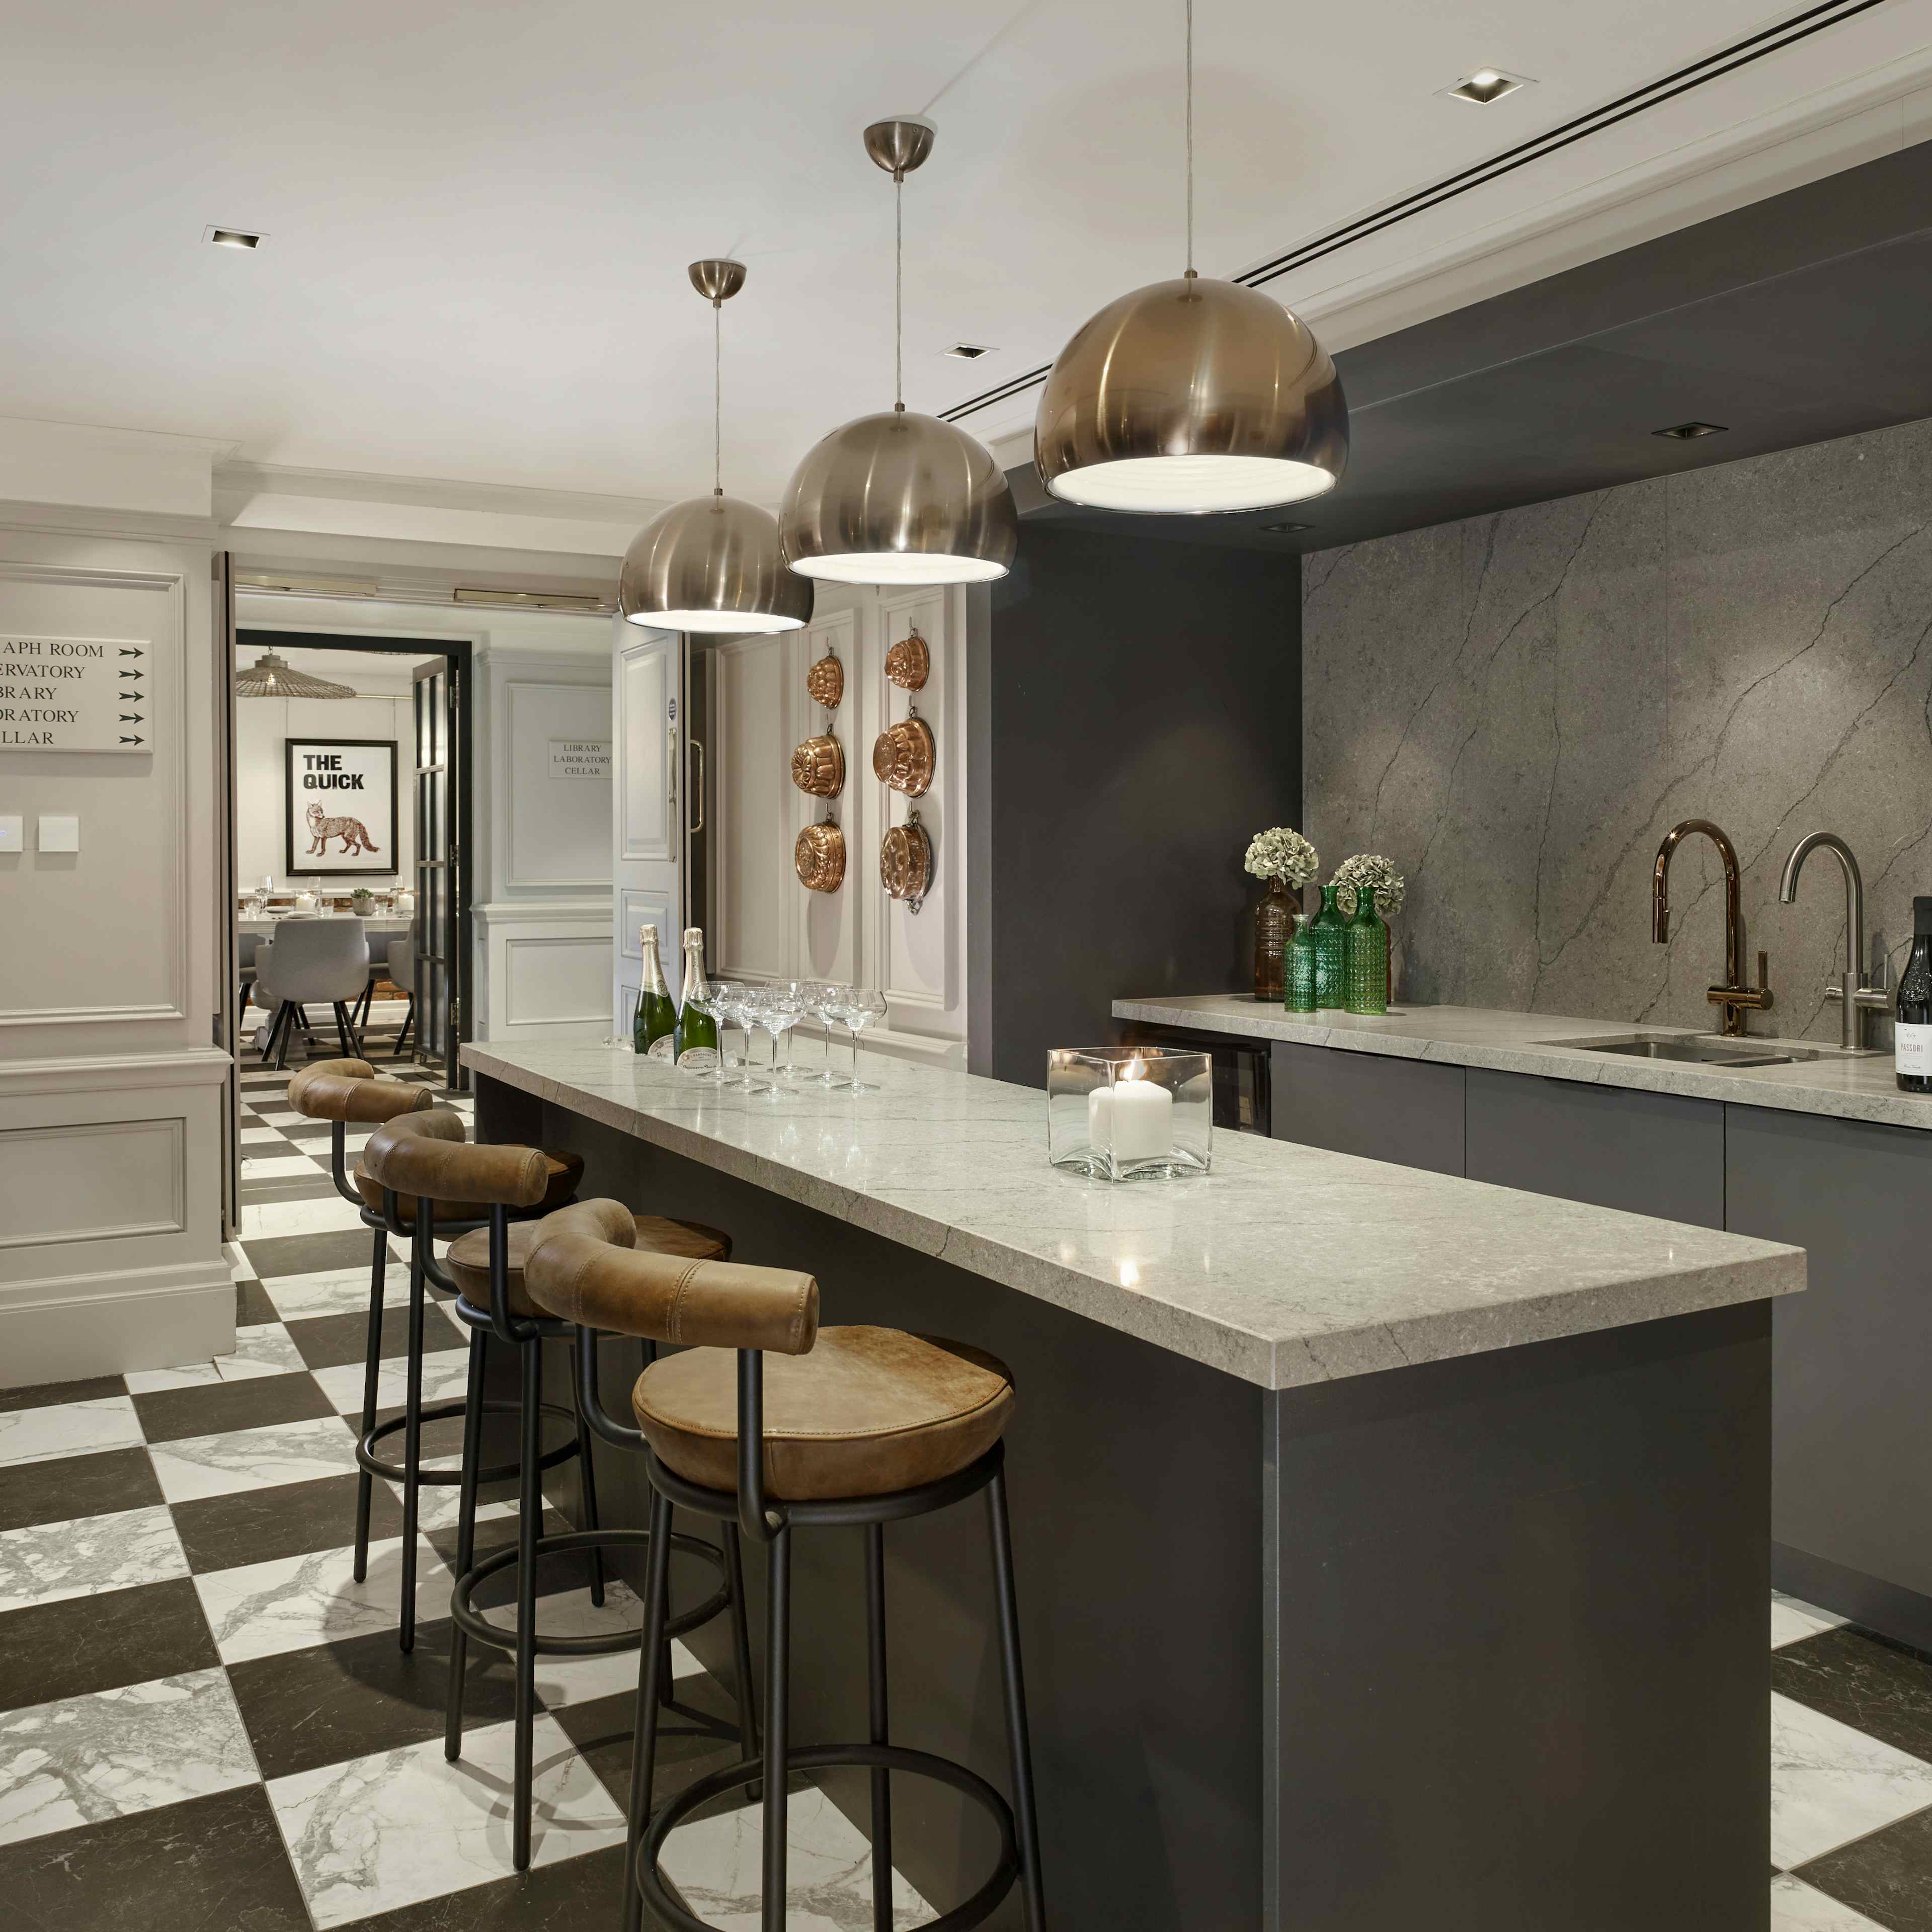 Holmes Hotel London - The Pantry image 1